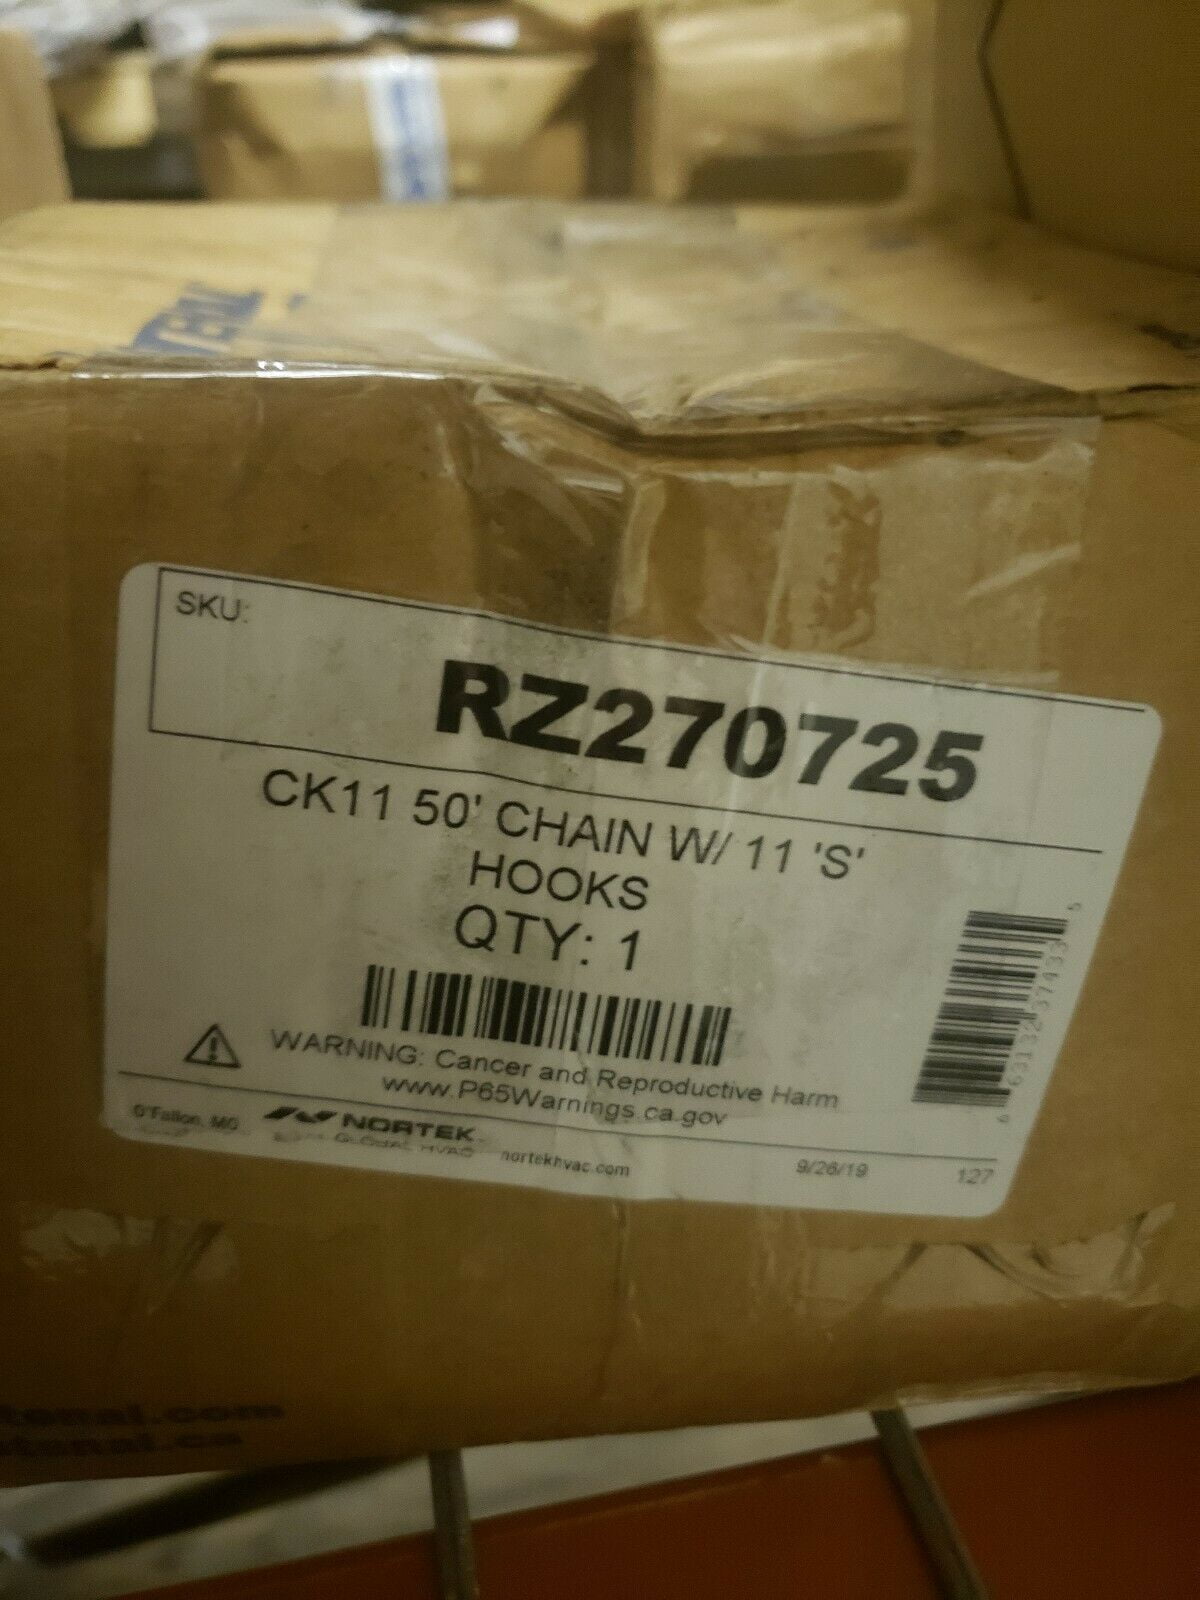 Details about   THOMAS & BETTS 270725 50' CHAIN W/ 11 S HOOKS 